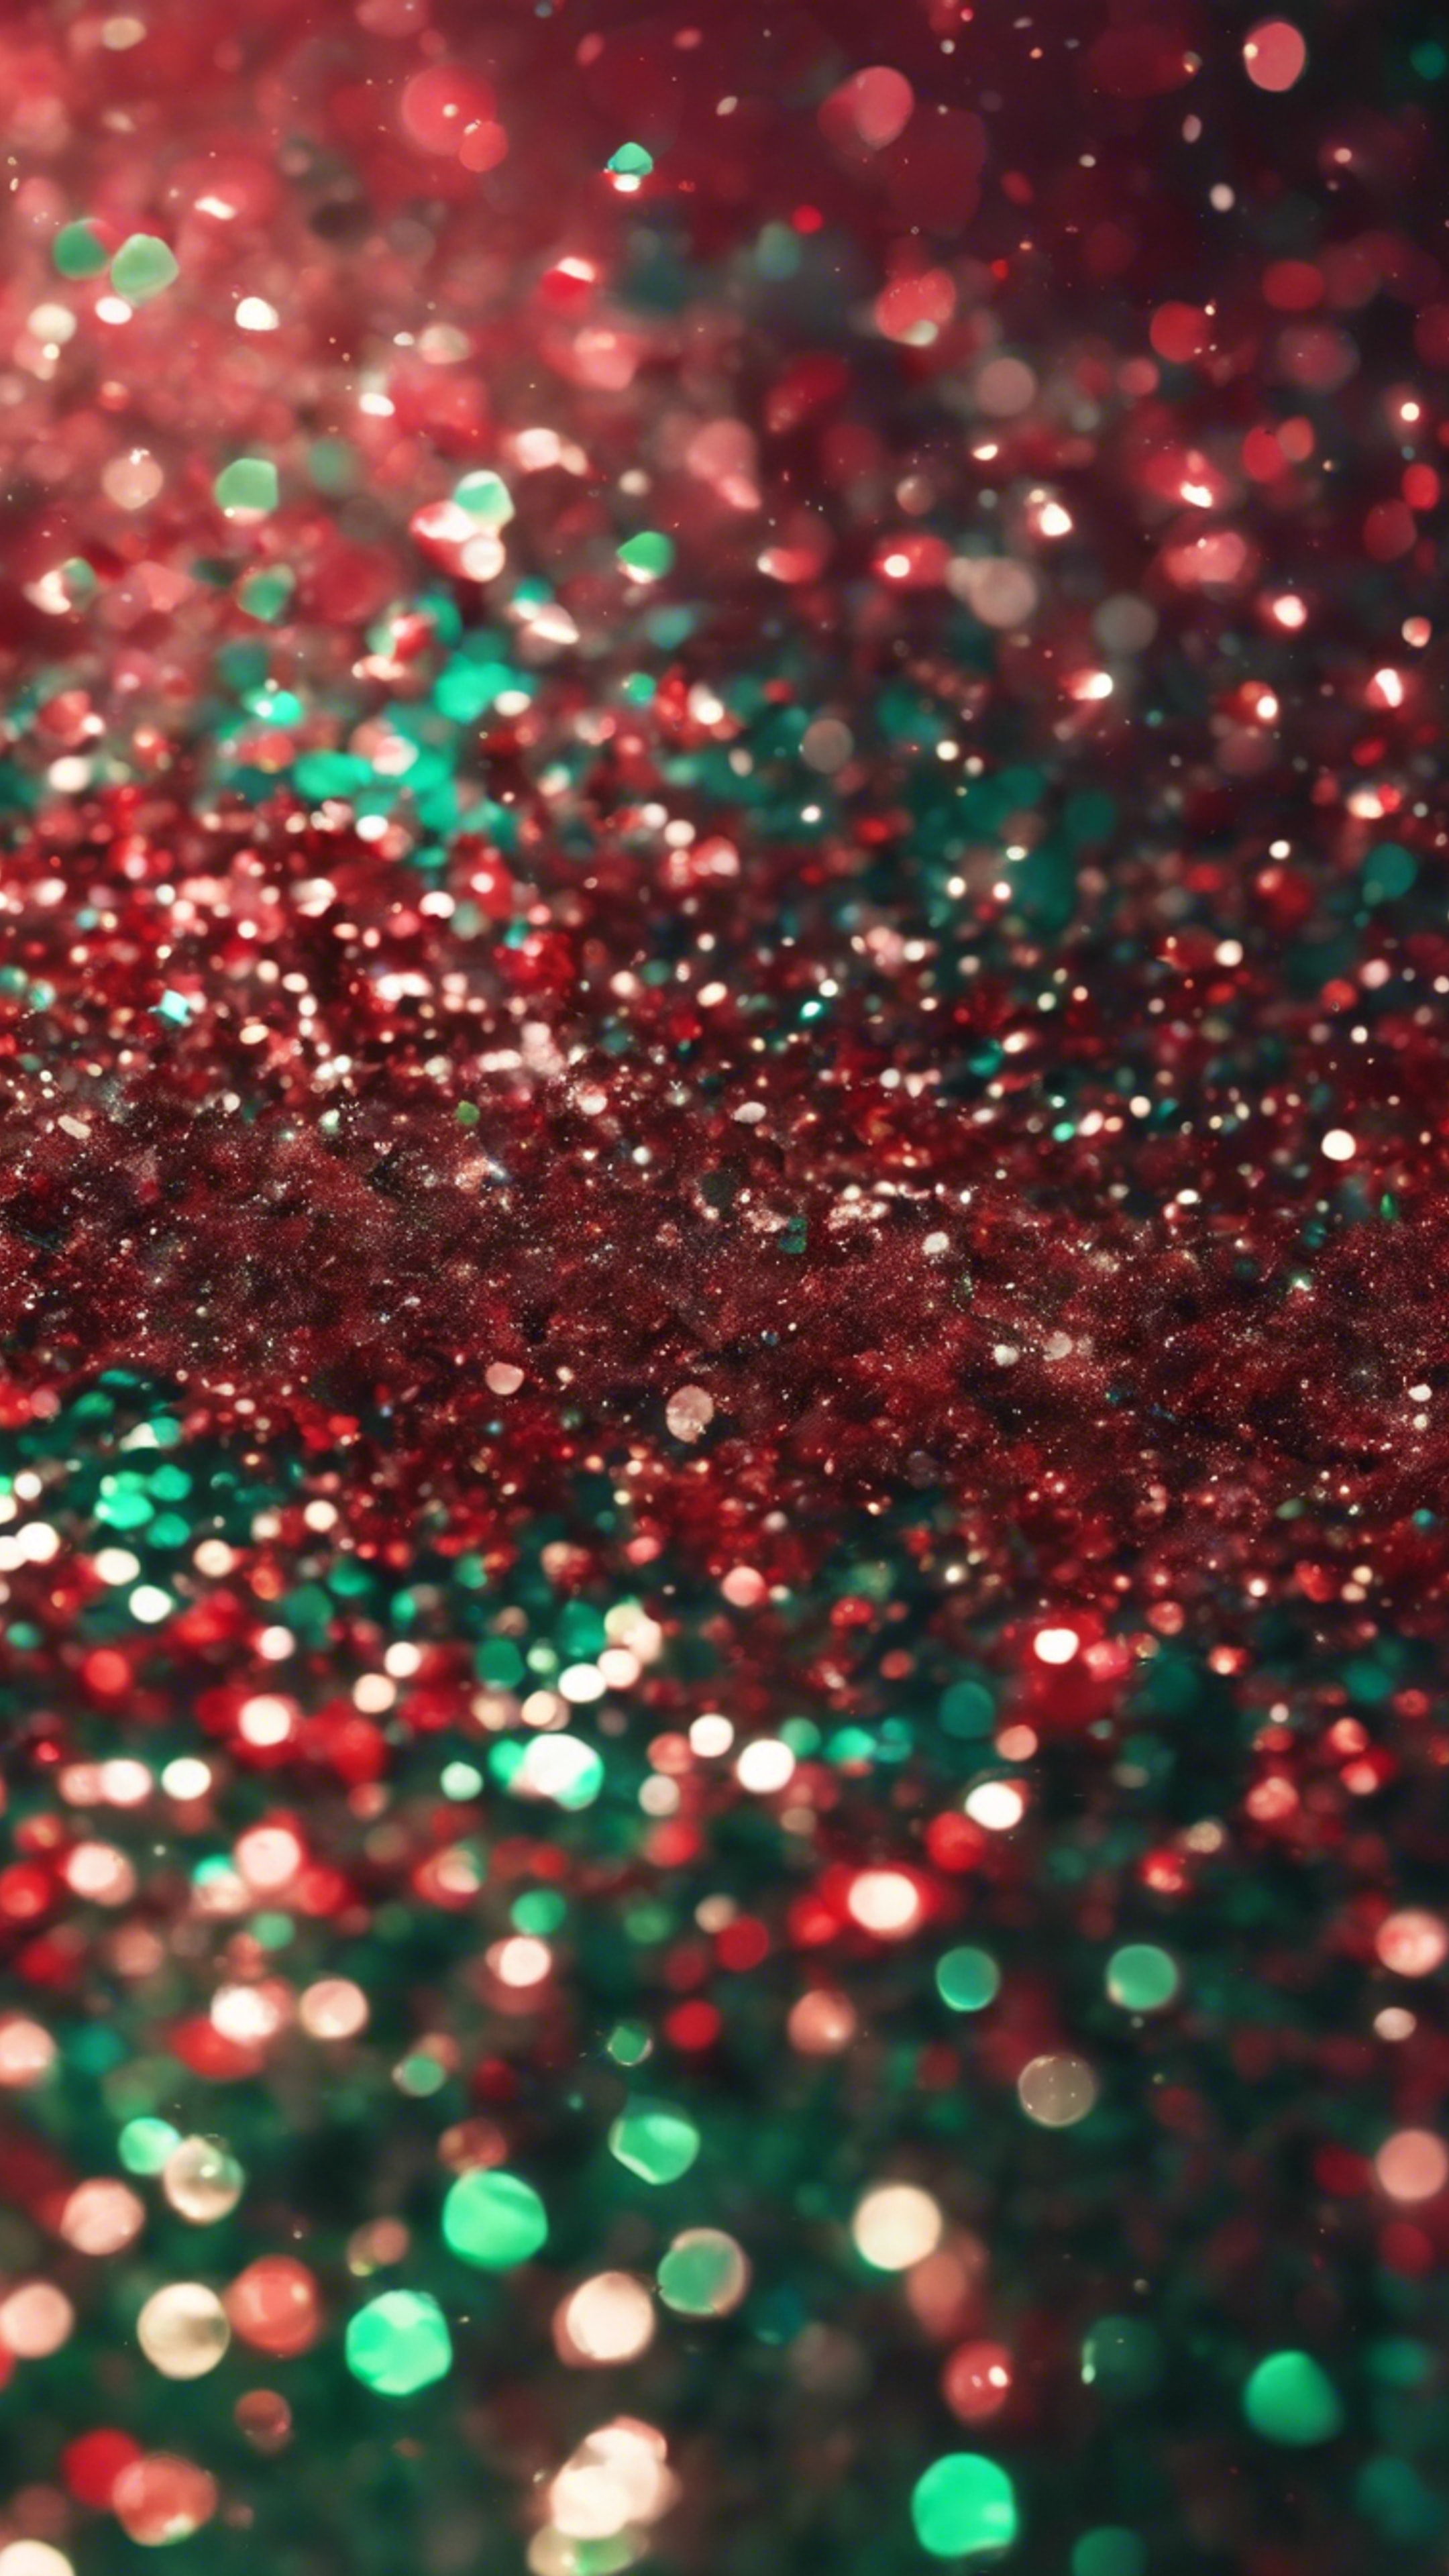 A mix of large and small particles of red and green glitter Валлпапер[305fad2da0d041f9bf26]